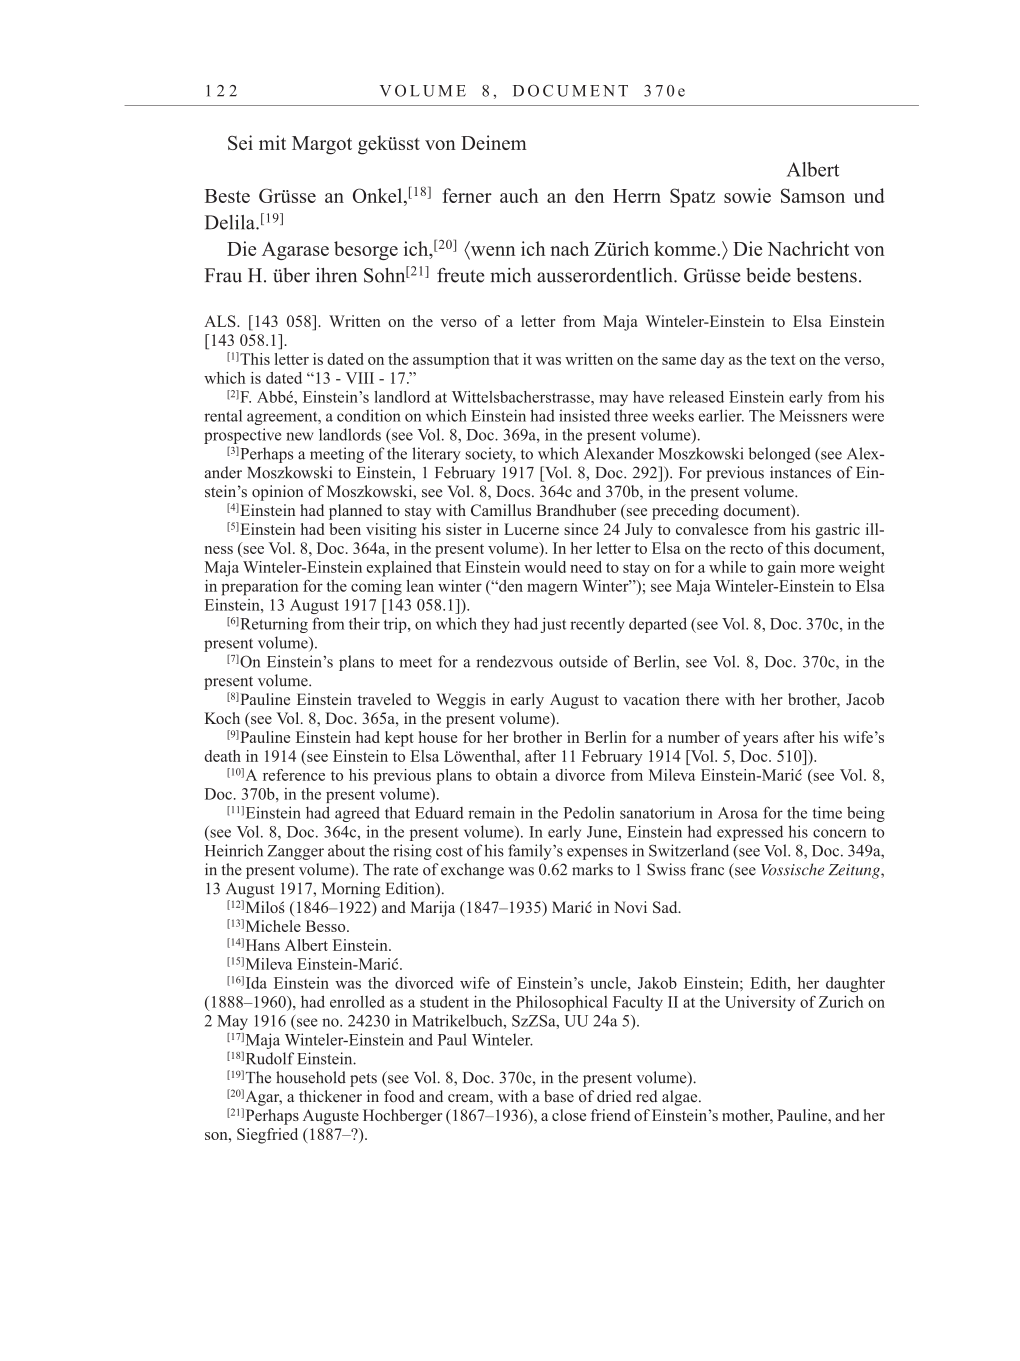 Volume 10: The Berlin Years: Correspondence May-December 1920 / Supplementary Correspondence 1909-1920 page 122